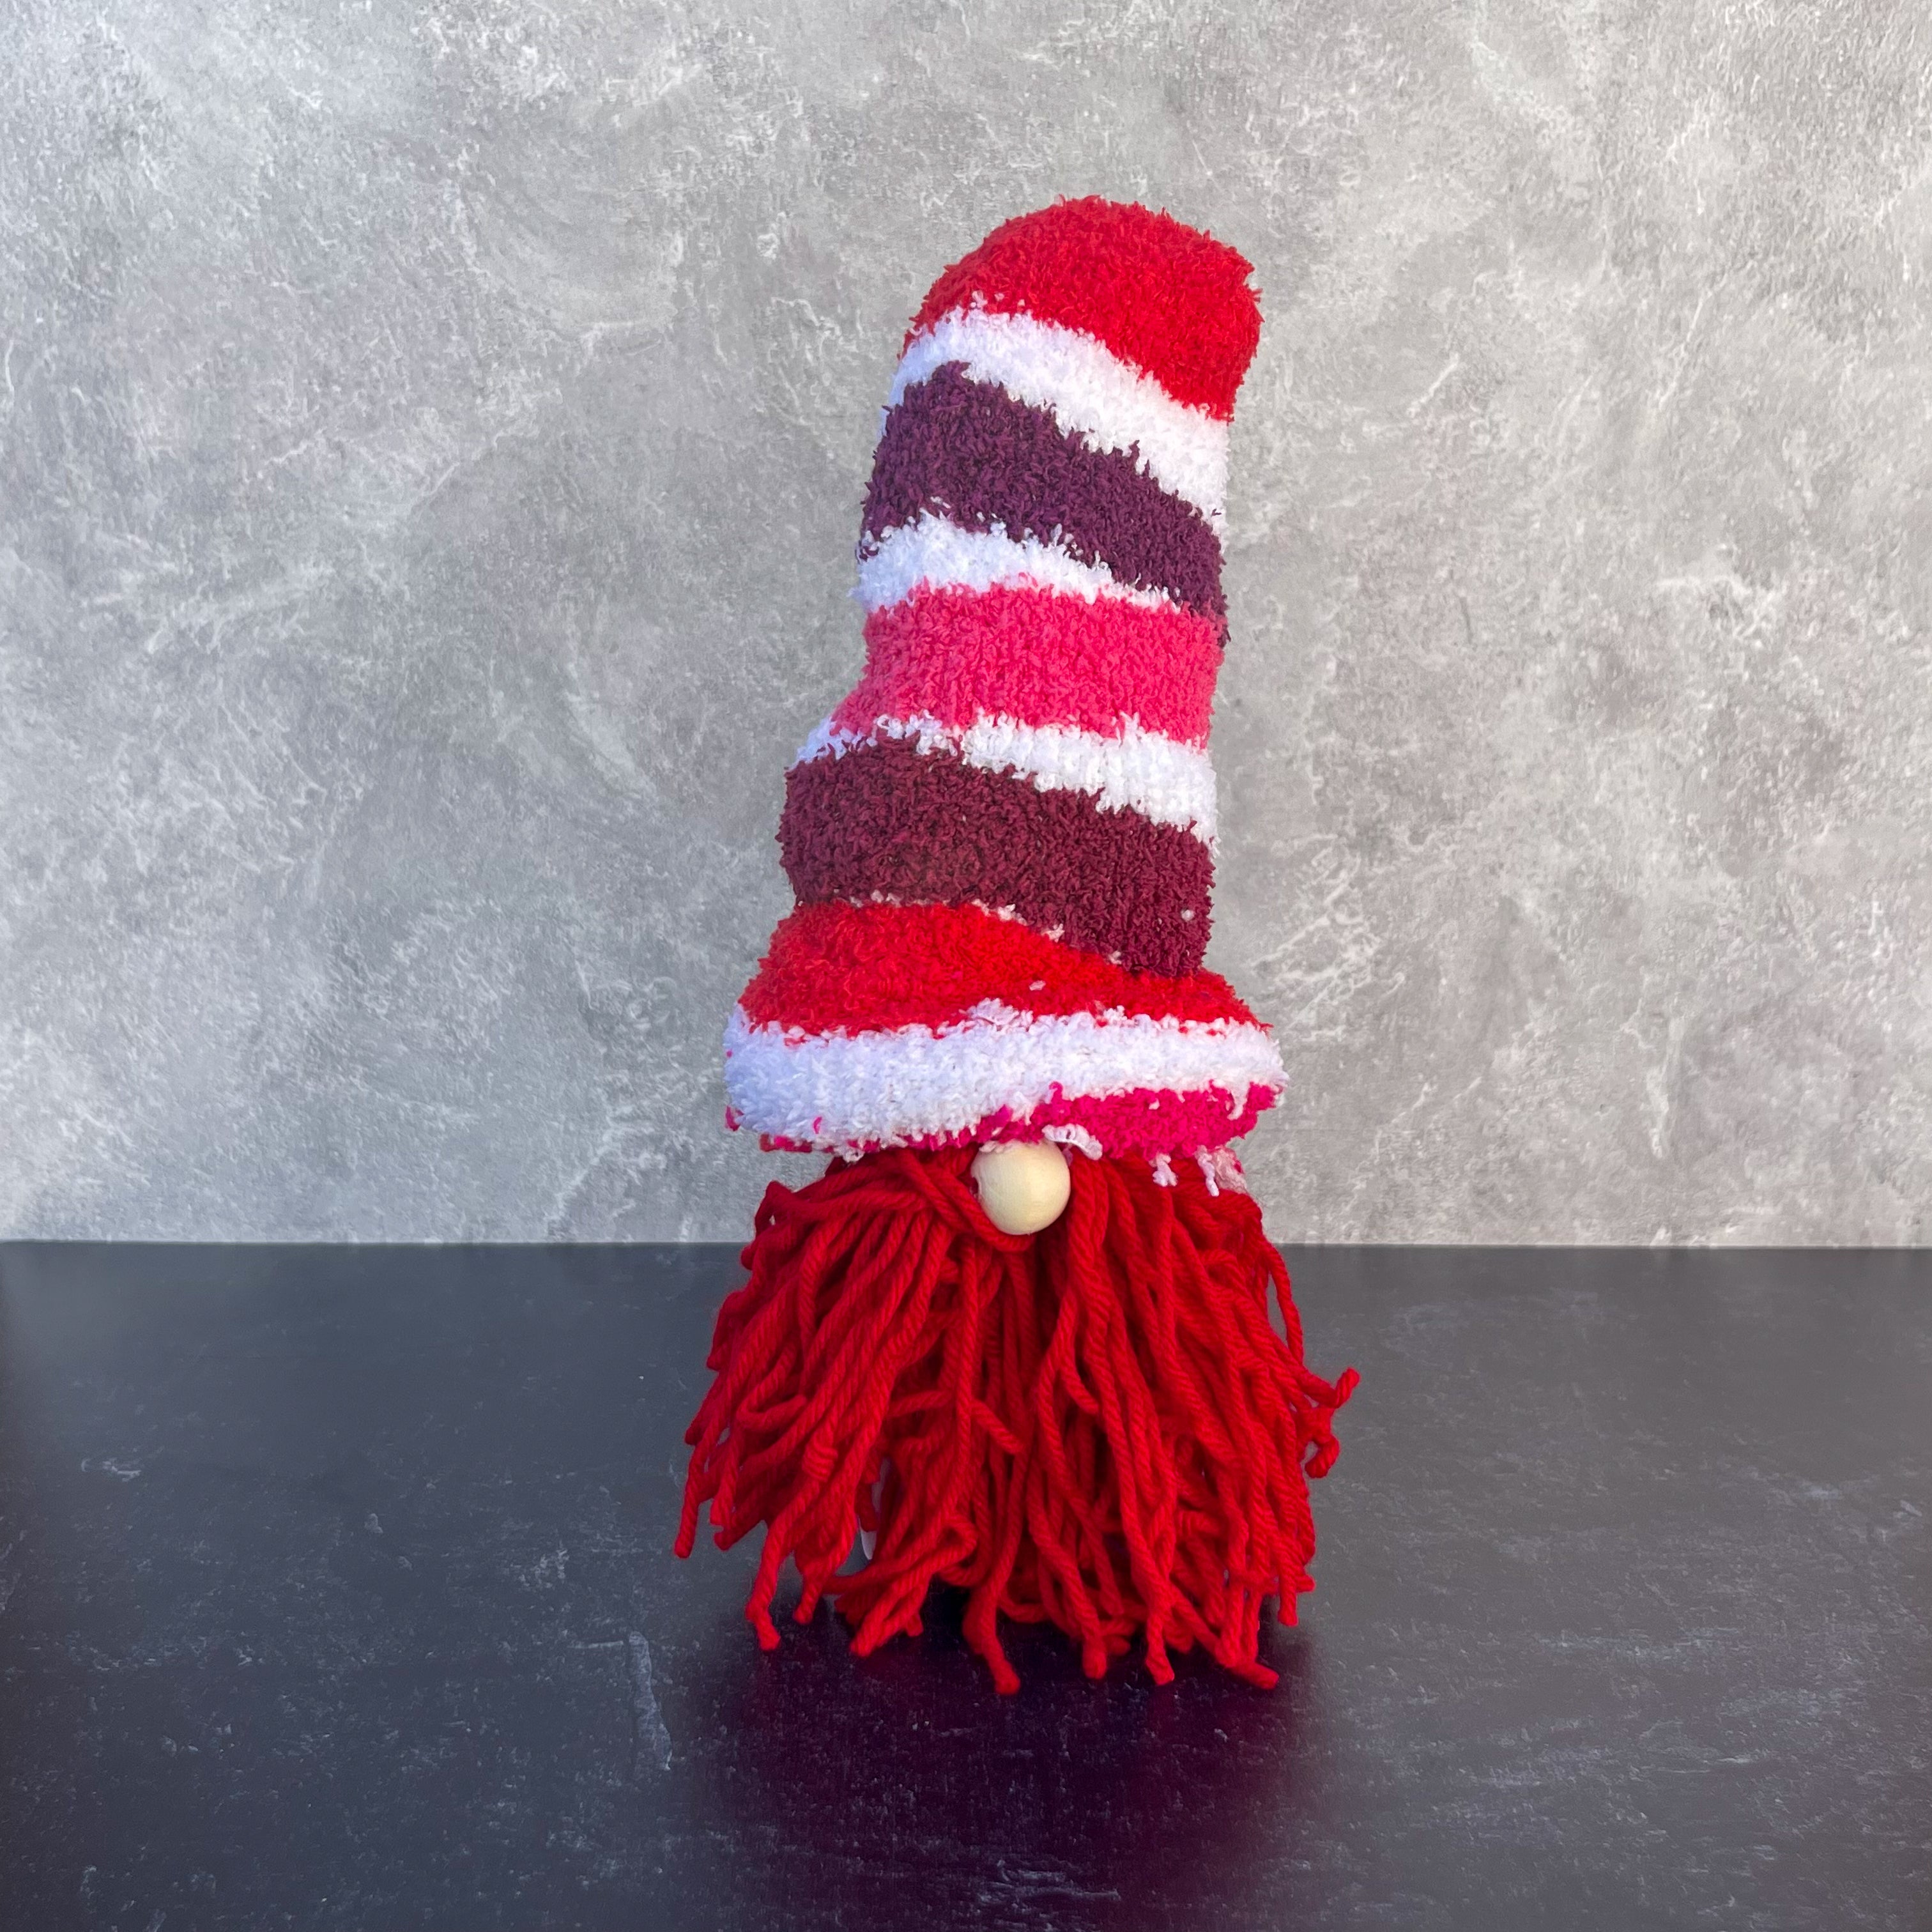 How To Make A Gnome Beard Out Of Yarn